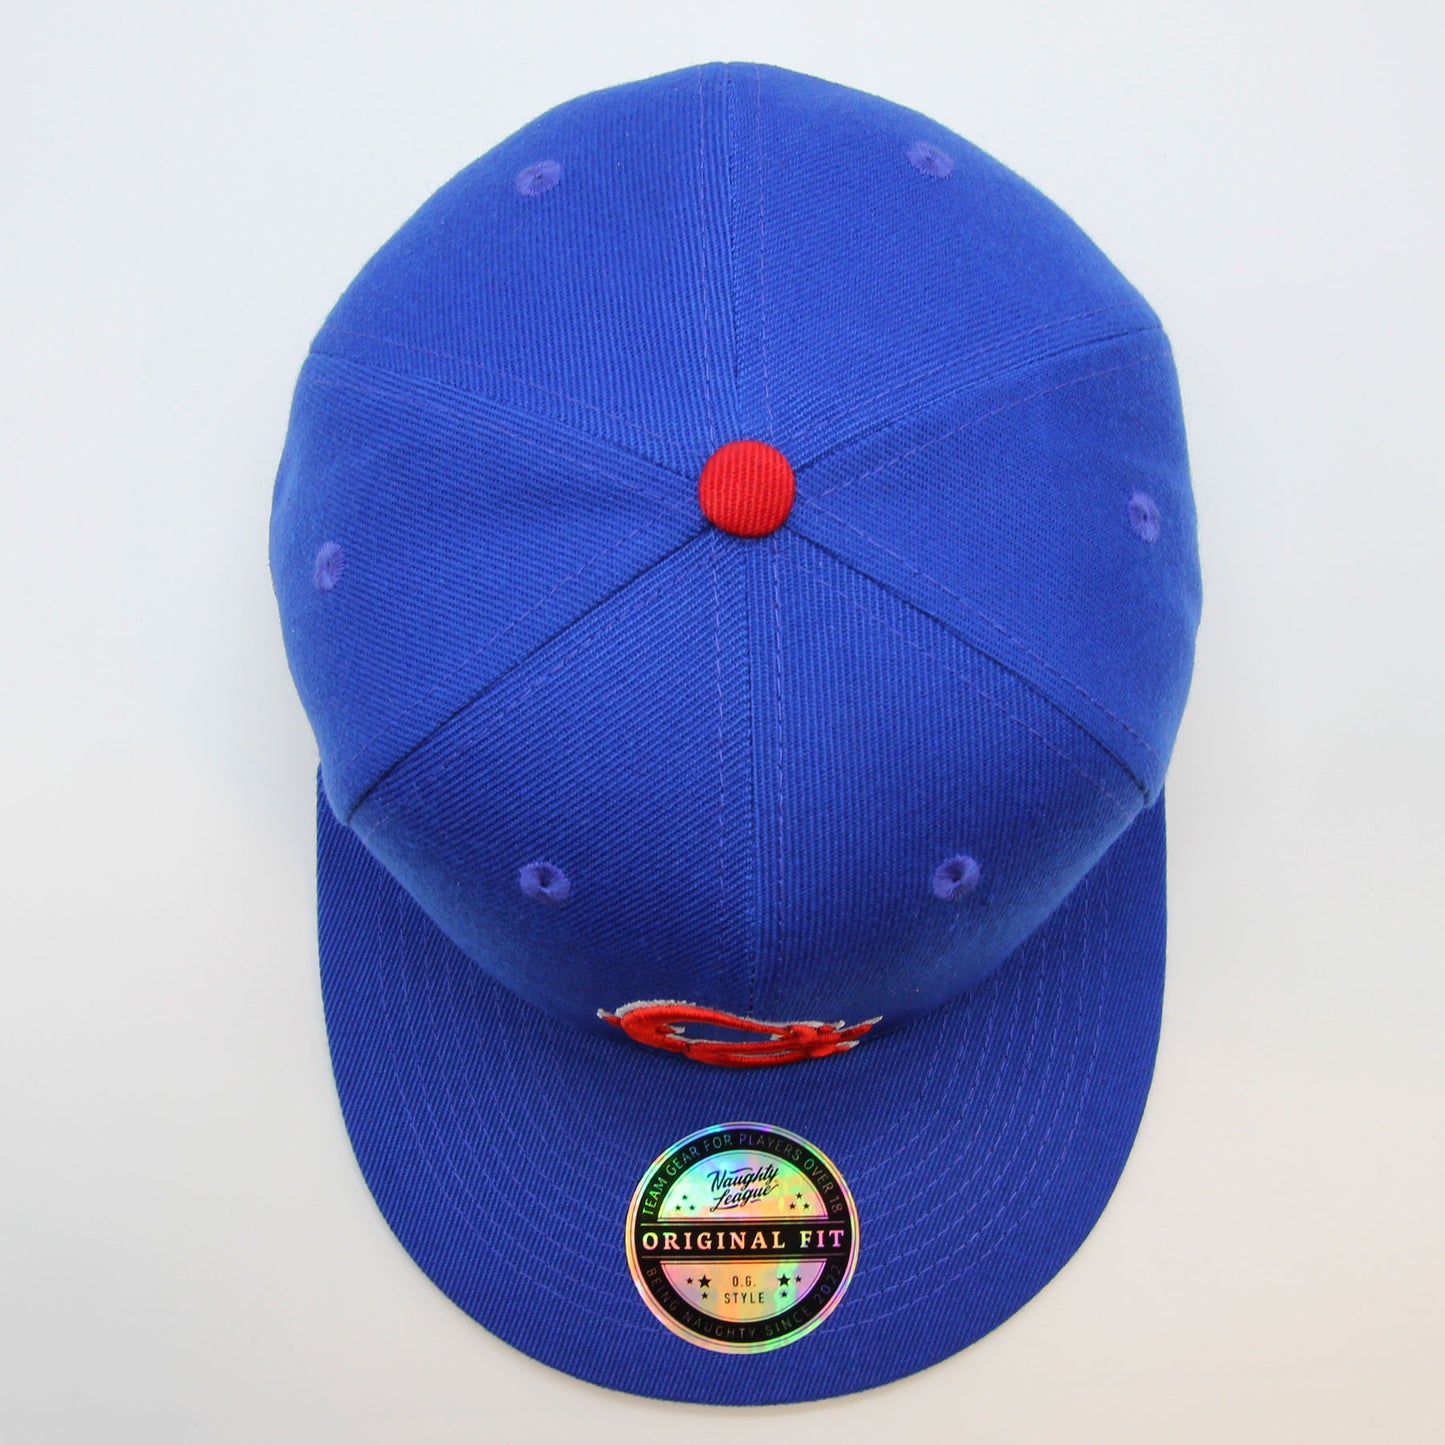 Naughty League South Central Original Gangsters fitted royal/red